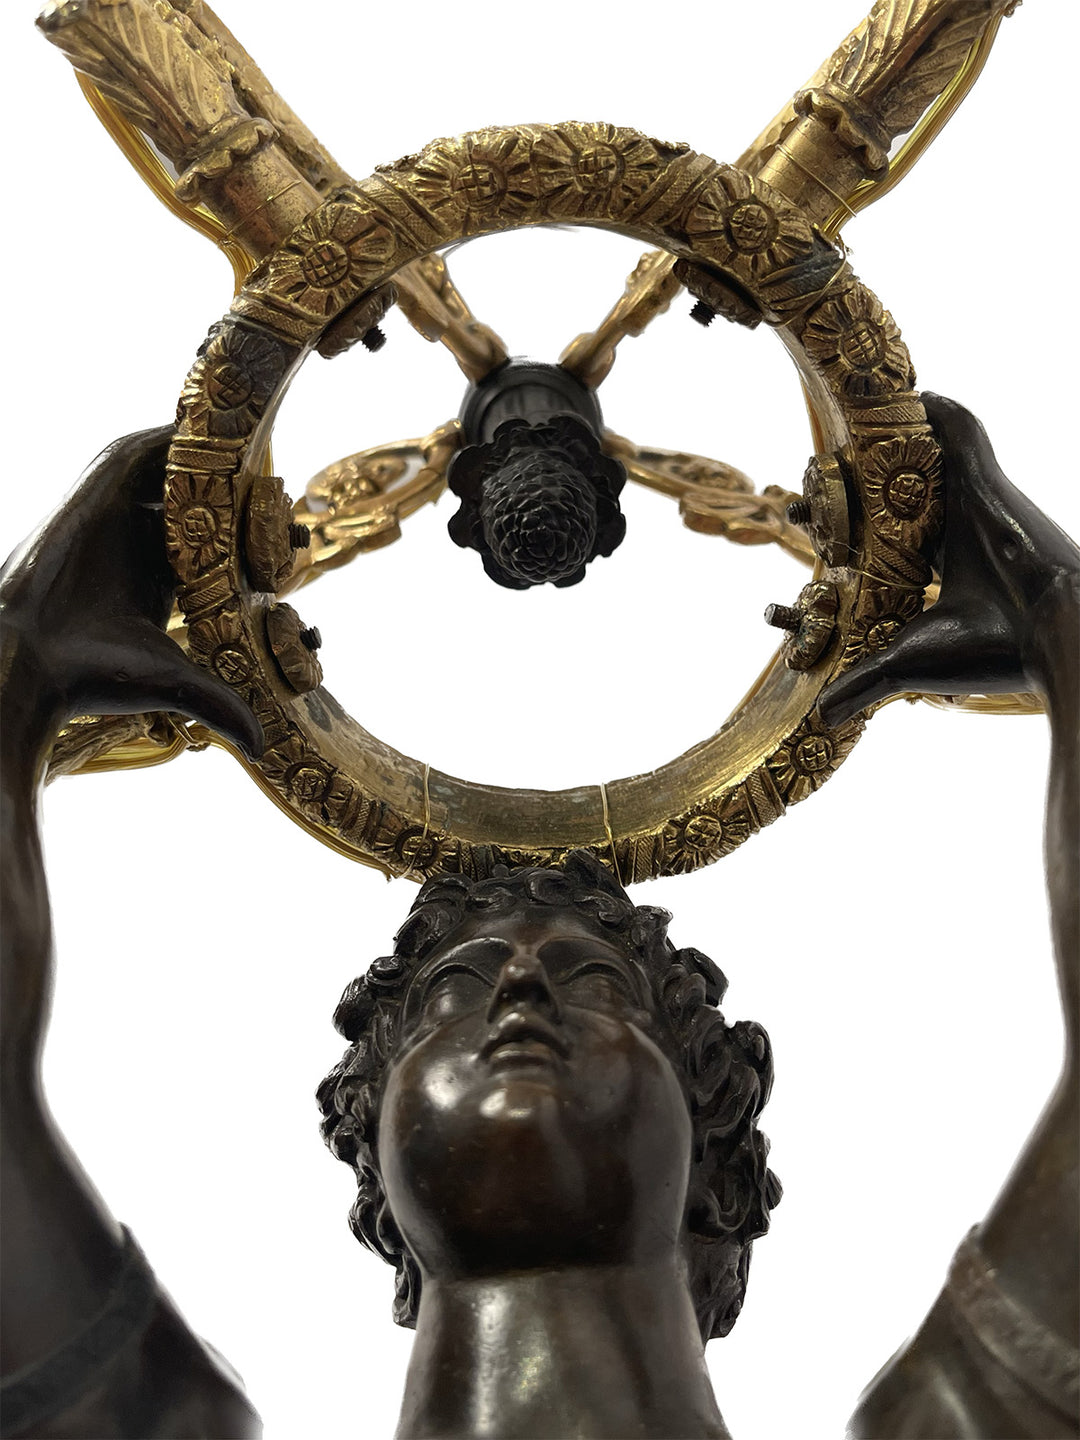 Pair of 19th Century French Gilt and Bronze Figural Sconces